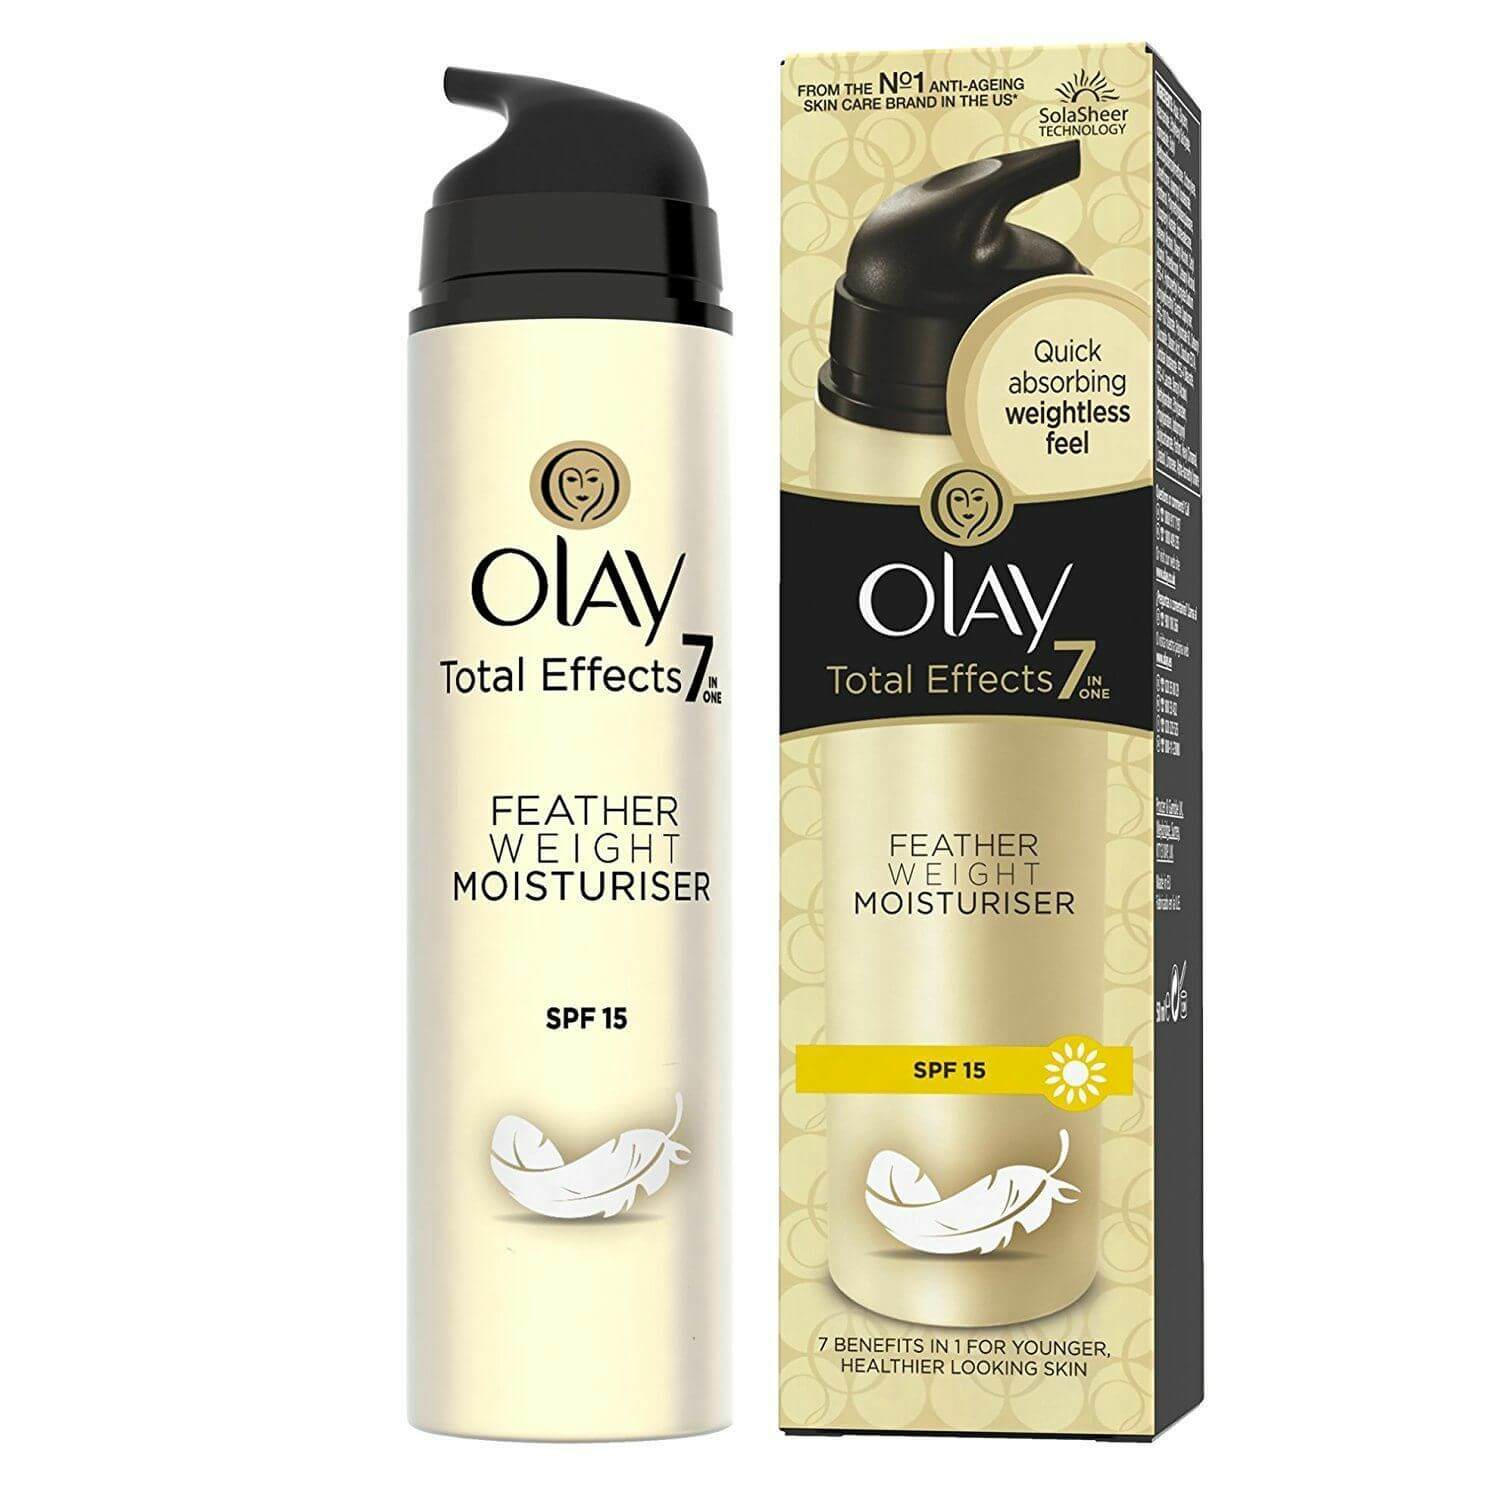 Olay Total Effects 7 Feather Weight Moisturiser SPF 15 50 ml